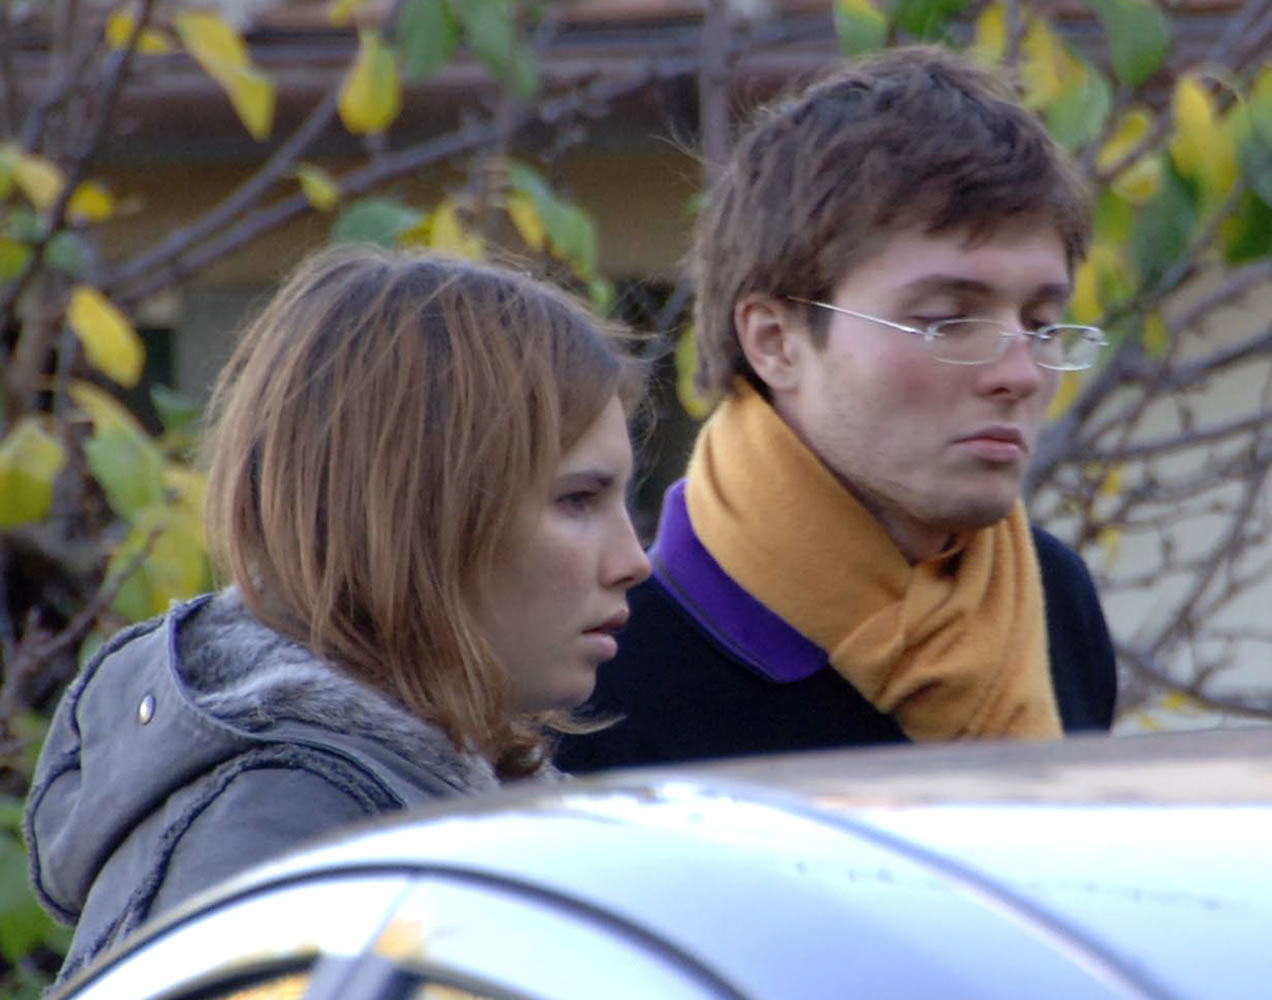 American exchange student Amanda Knox, left, and her Italian boyfriend, Raffaele Sollecito, outside the rented house where 21-year-old British student Meredith Kercher was found dead in Perugia, Italy, on Nov.